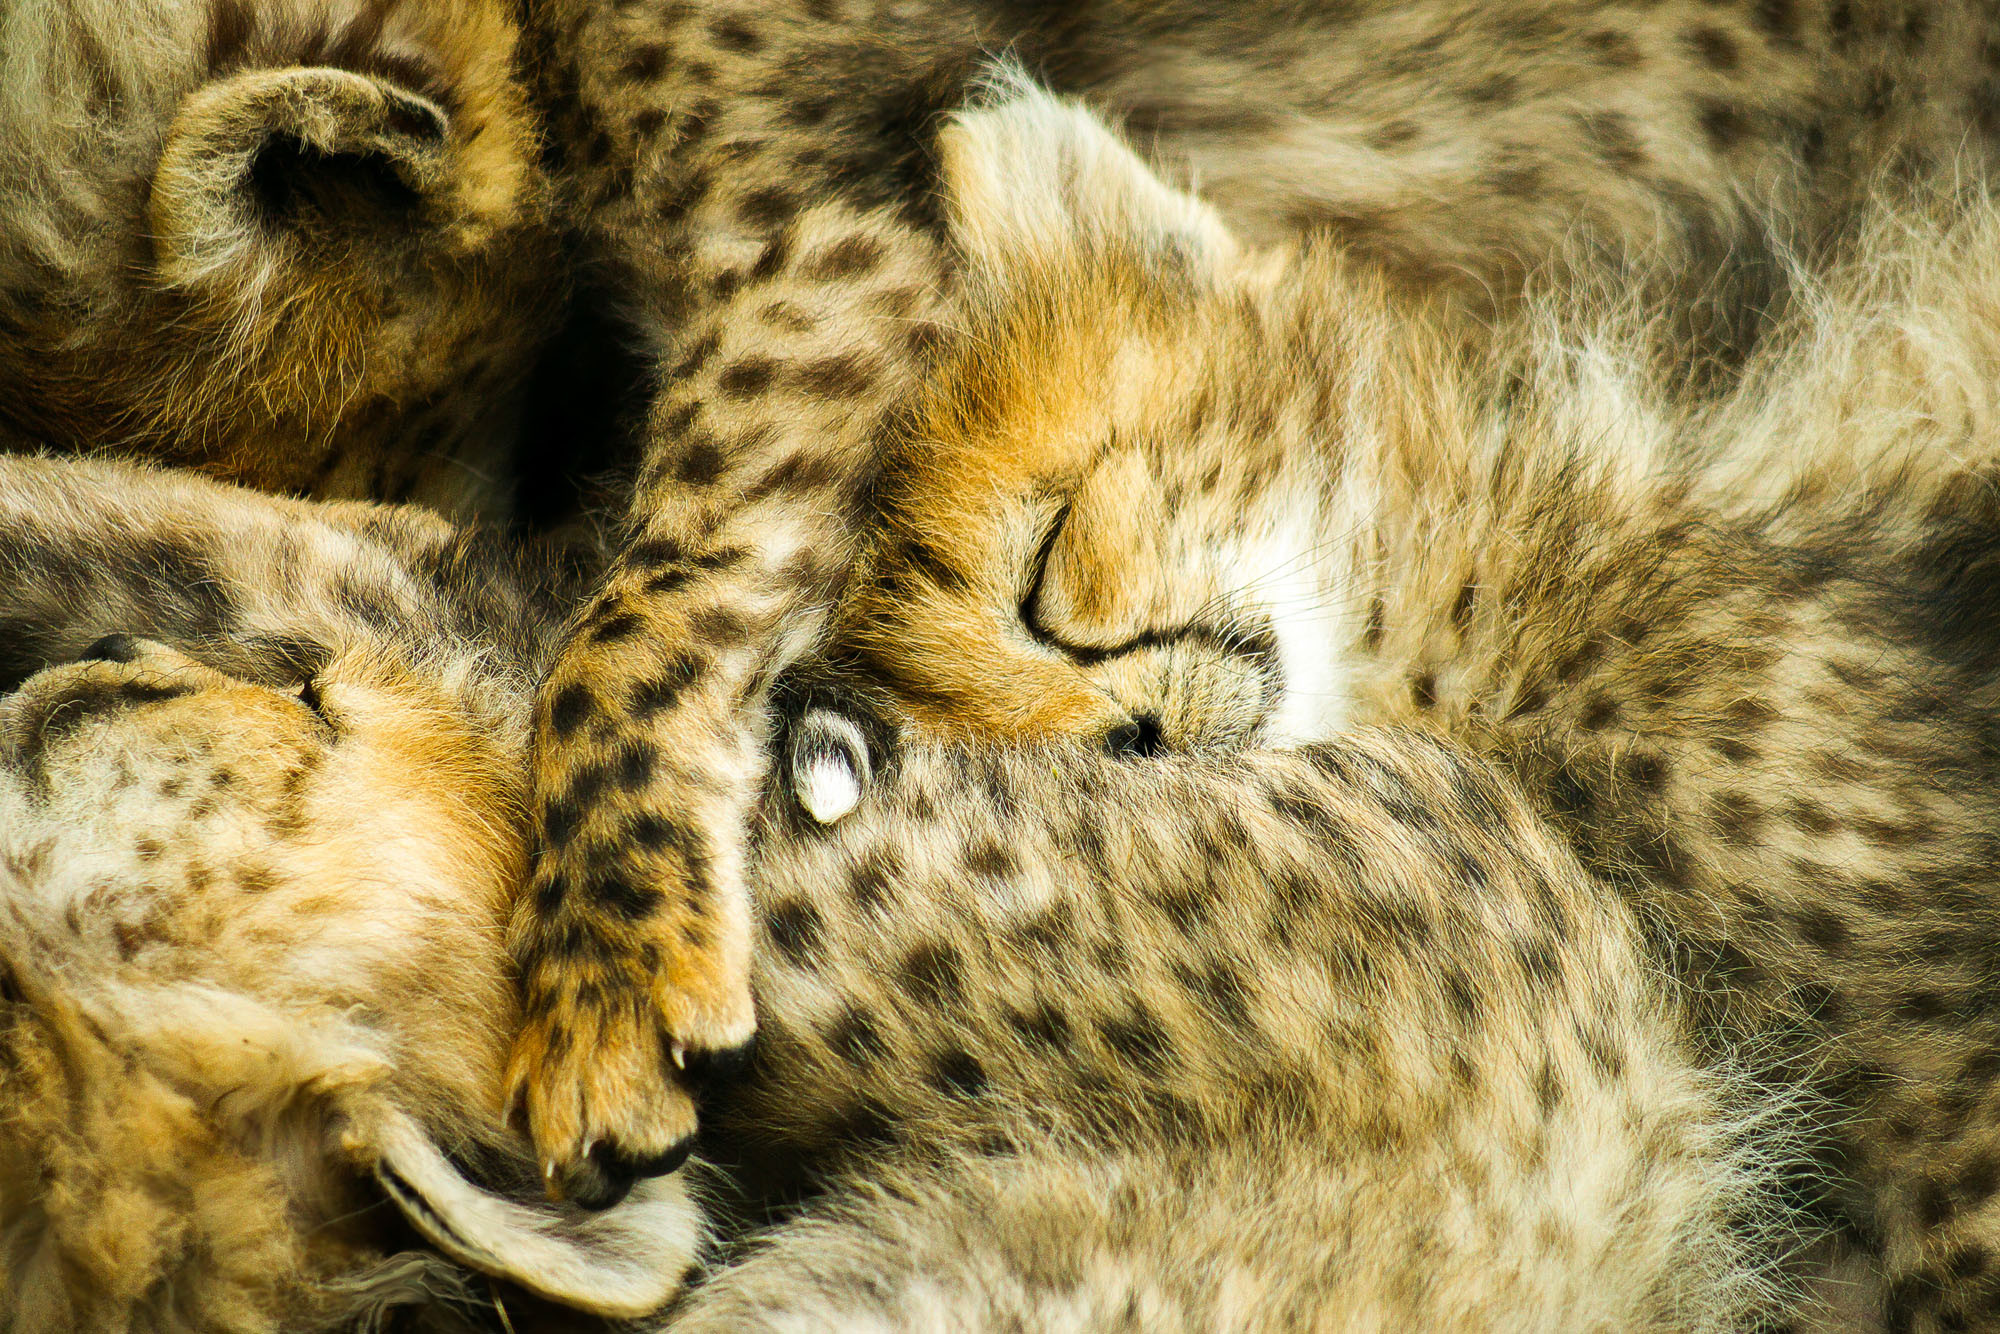 Here's how you can have a sleepover with a baby cheetah